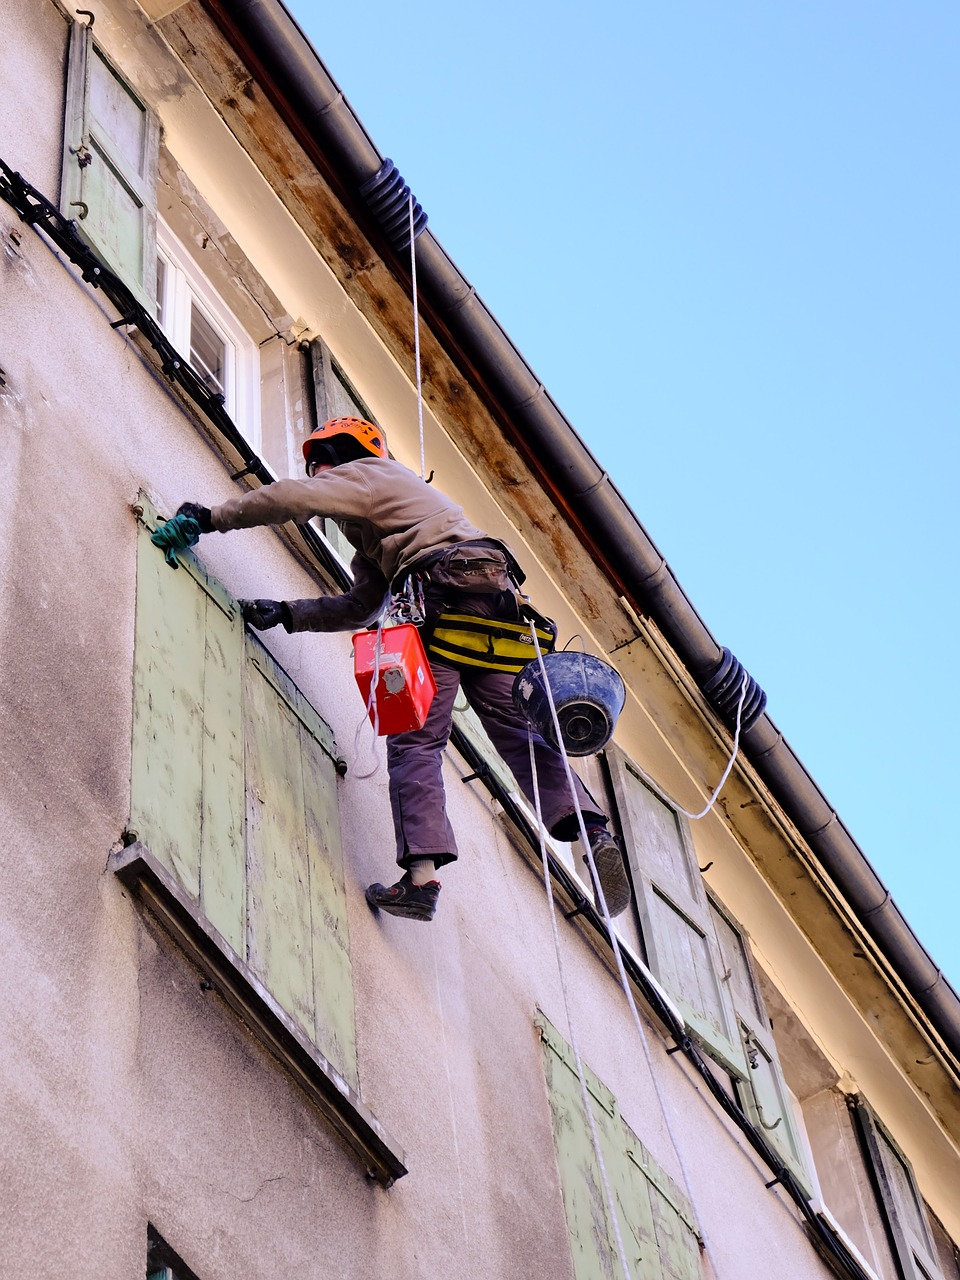 Building worker from Pixabay